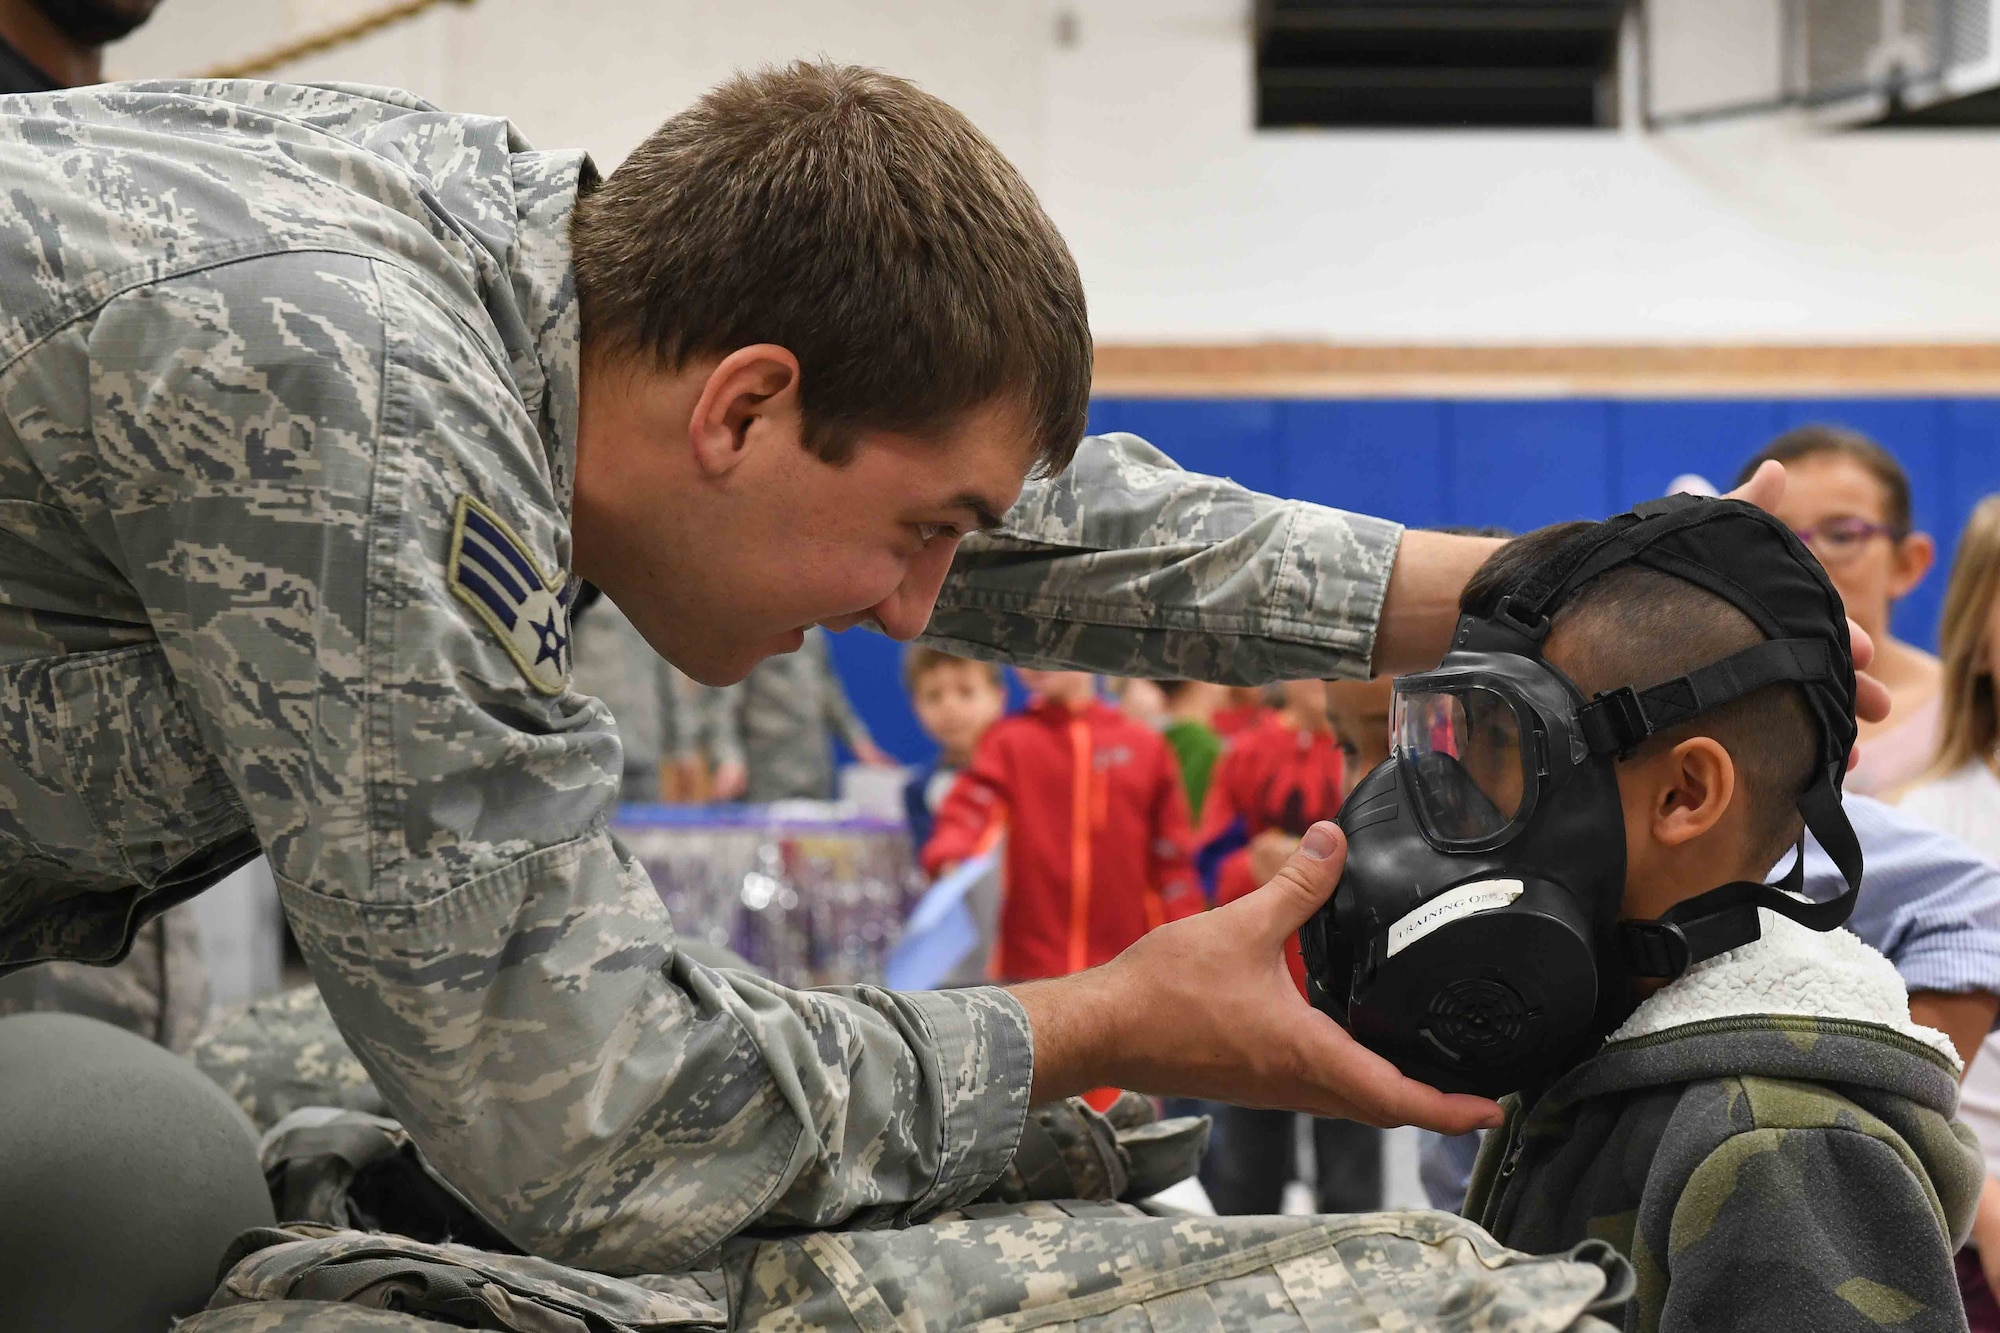 Senior Airman Jacob Peters, 75th Logistics Readiness Squadron, assists a student trying on a gas mask during the Kids Deployment Day event, Hill Field Elementary, Utah, April 14, 2017. (U.S. Air Force photo/R. Nial Bradshaw)